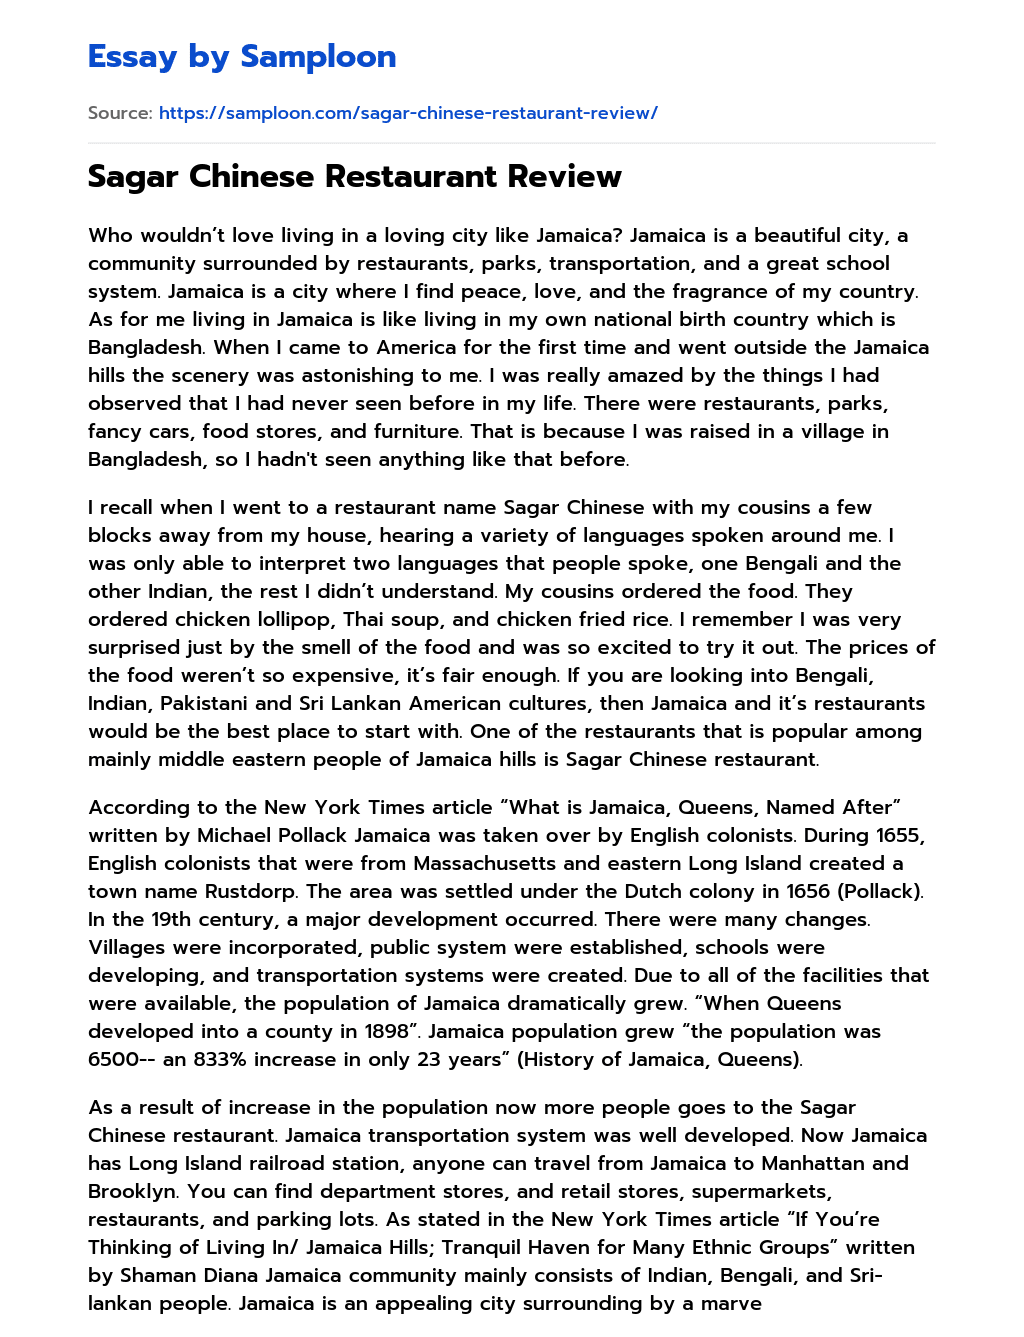 example of restaurant review essay